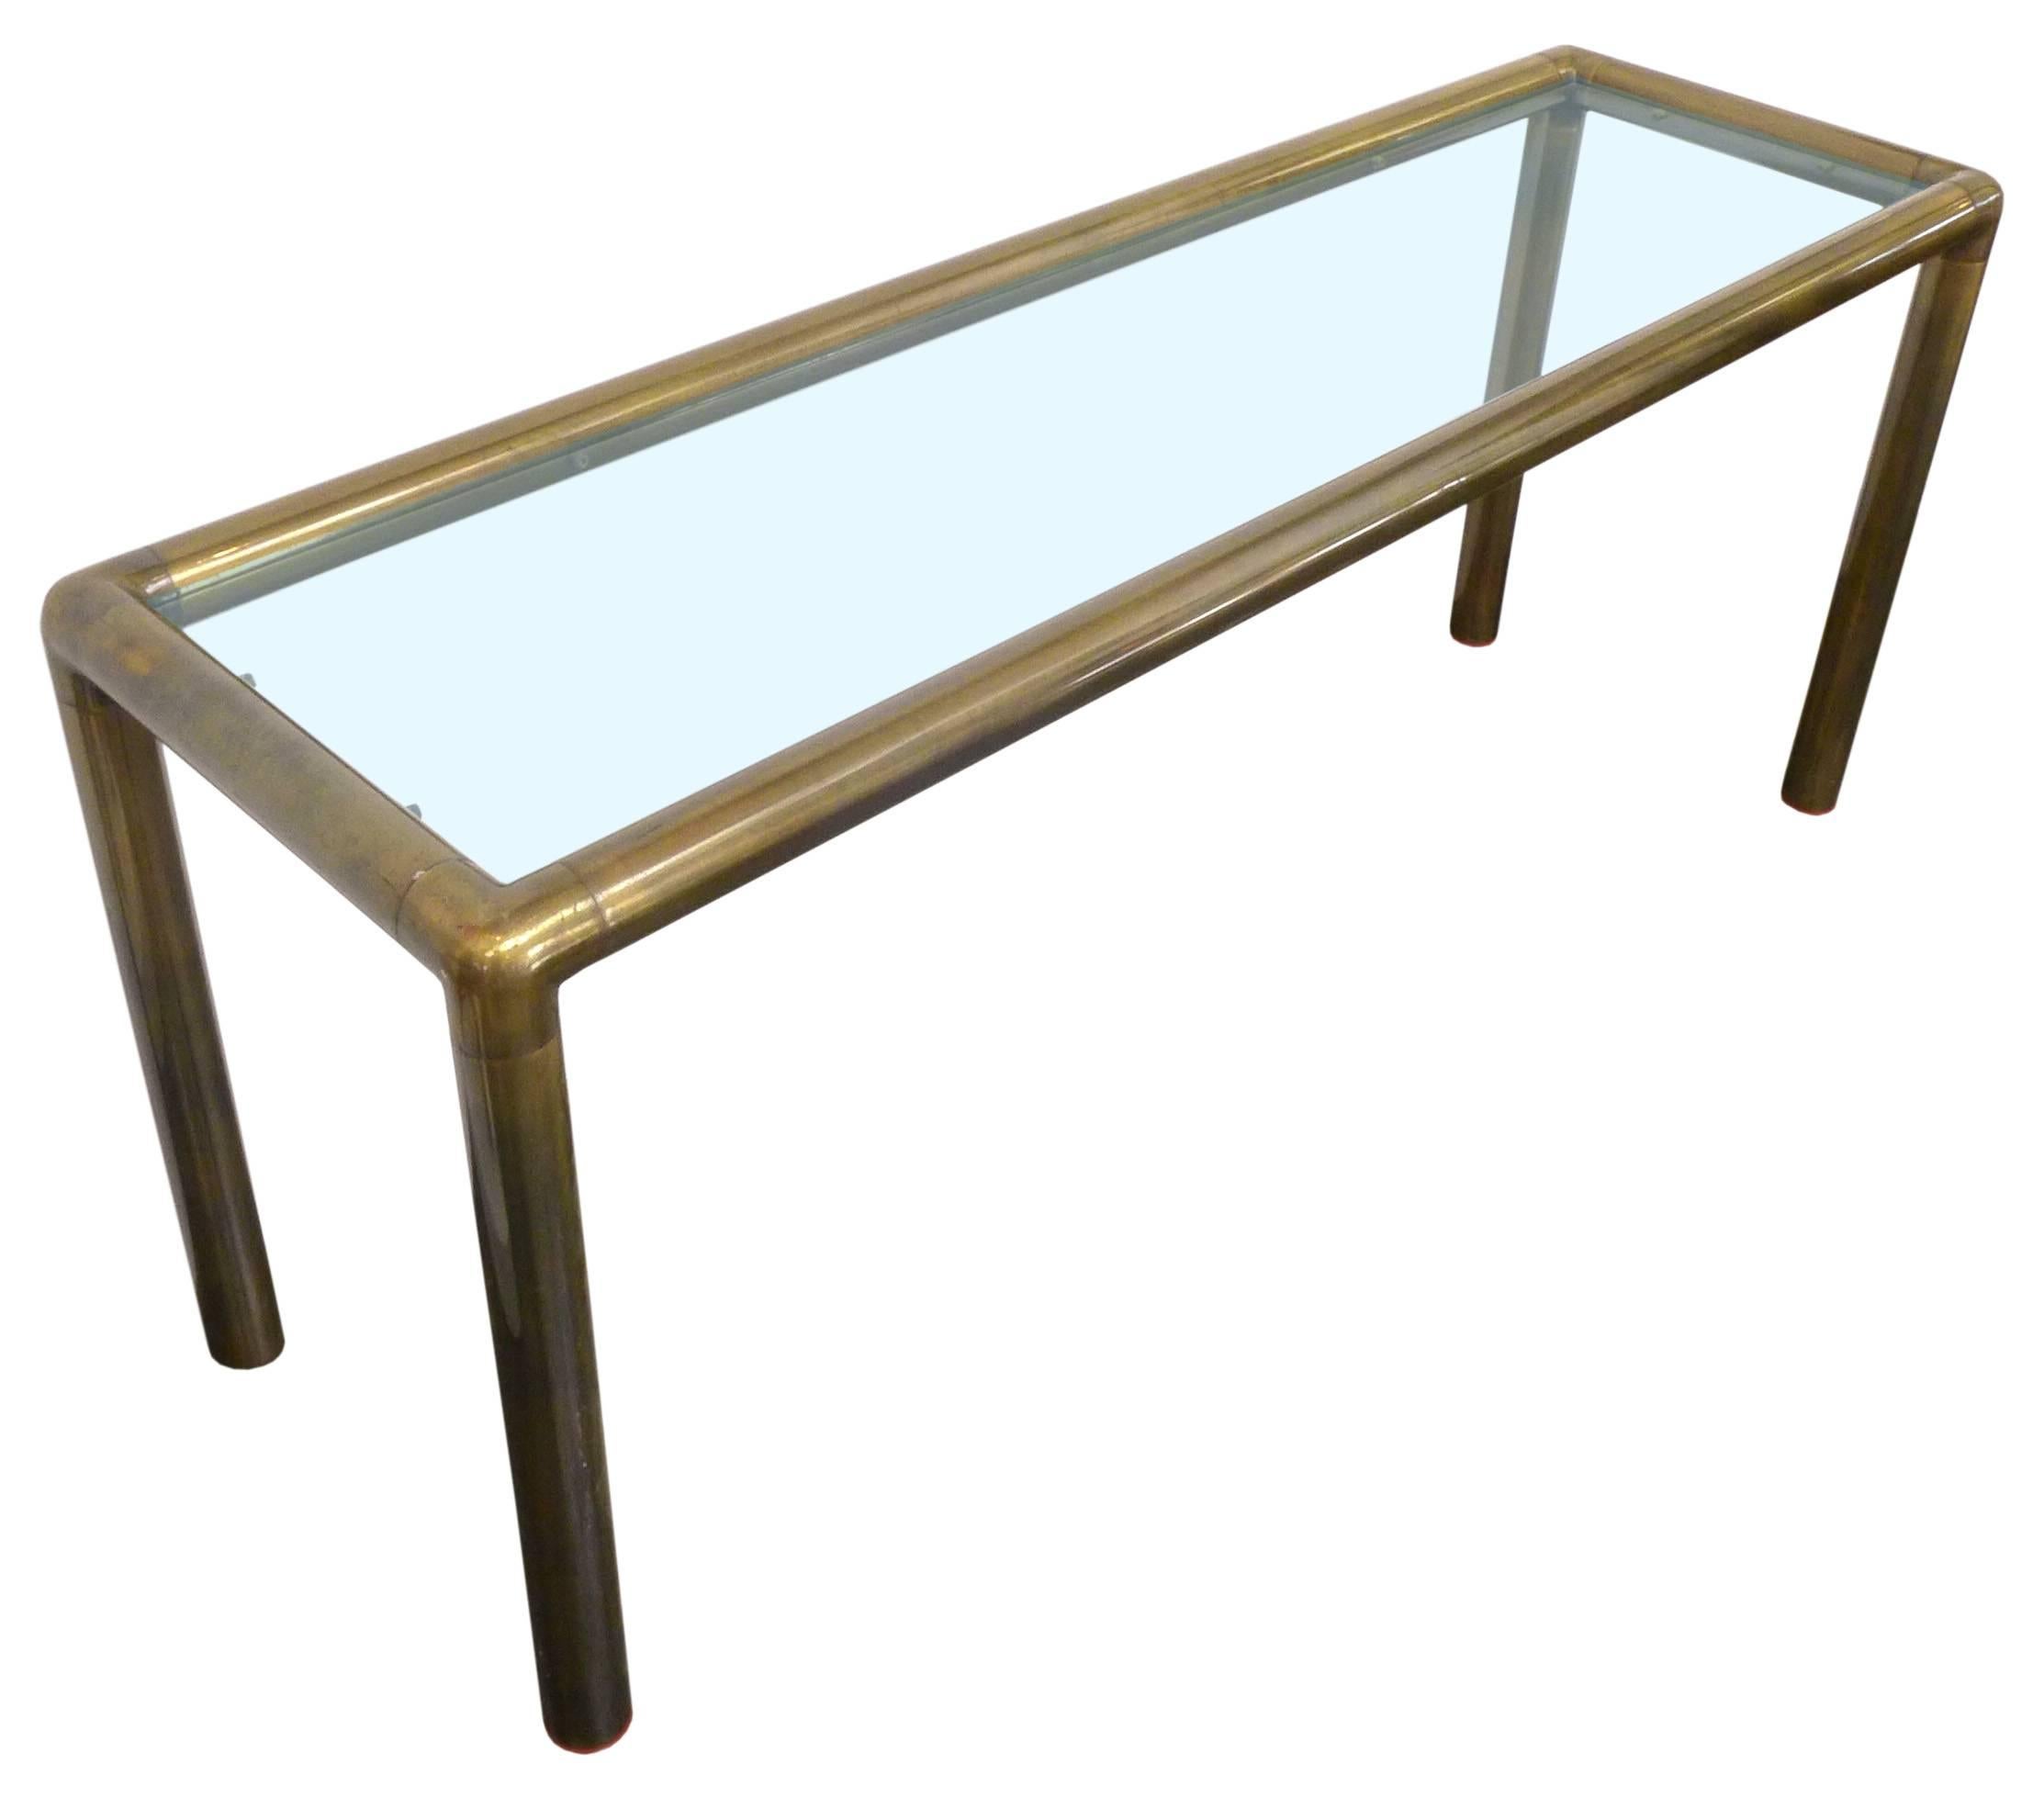 A wonderful glass and tubular brass console or sofa table. A simple, elegant frame of thick-gauge tubular brass cradling an inset glass top. Wonderful scale and mix of materials, an even patina to the brass throughout. In the manner of and possibly